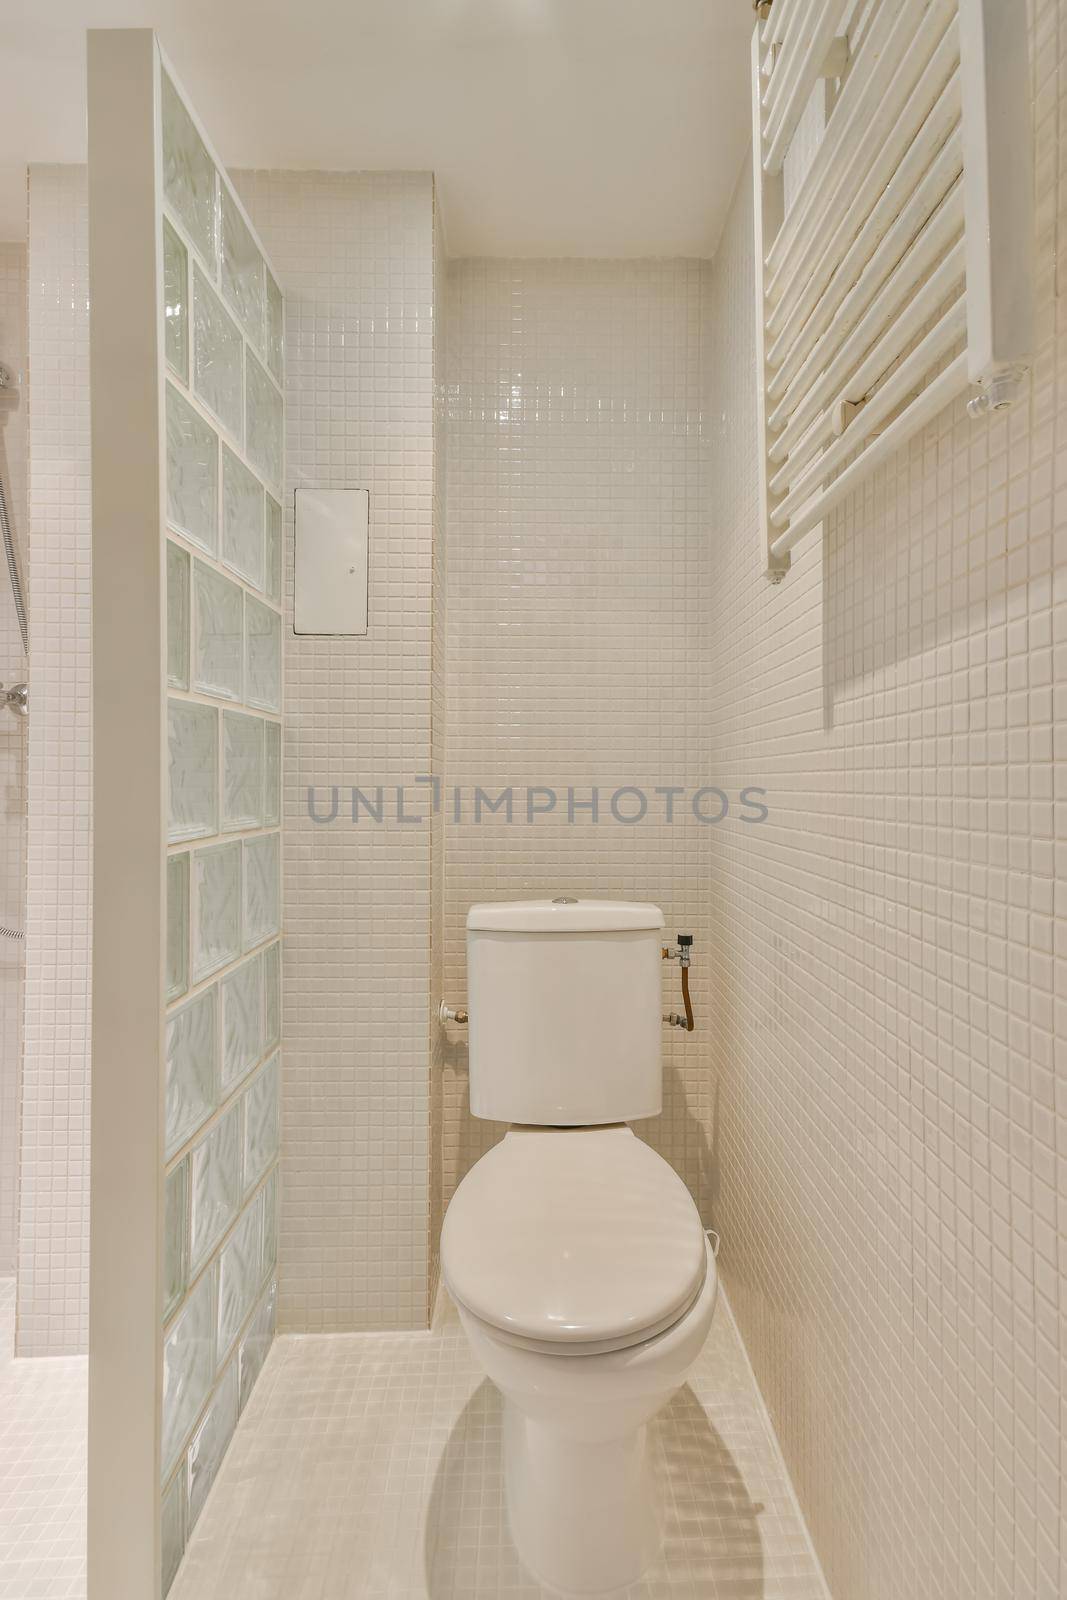 The interior of a bathroom in a cozy house with a toilet separated by a glass partition